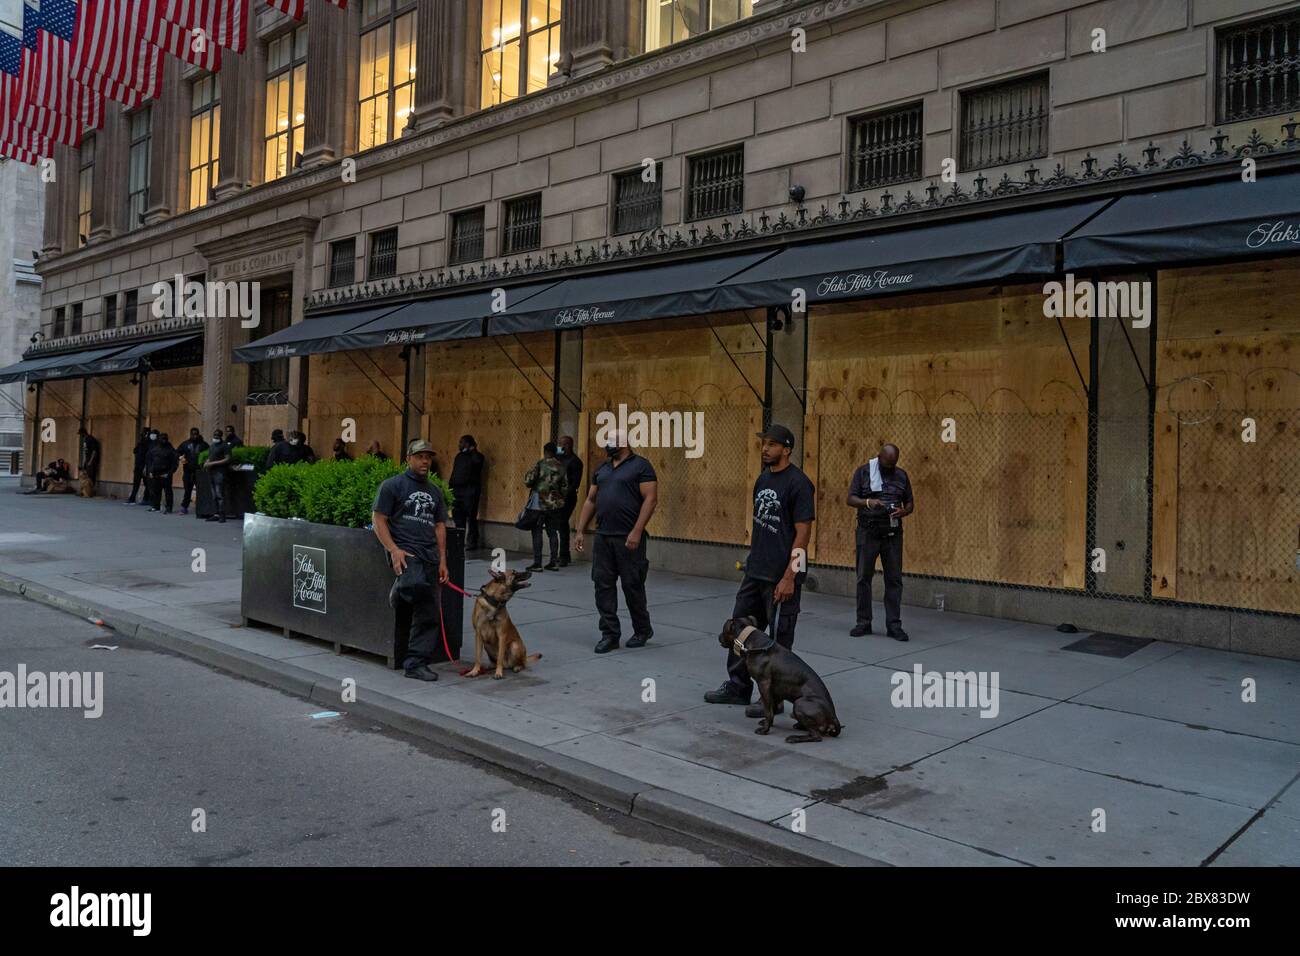 NEW YORK, NY - JUNE 03: Famed Saks Fifth Avenue prepare for more looting with with chain link fence over the boarded windows and security guards and d Stock Photo